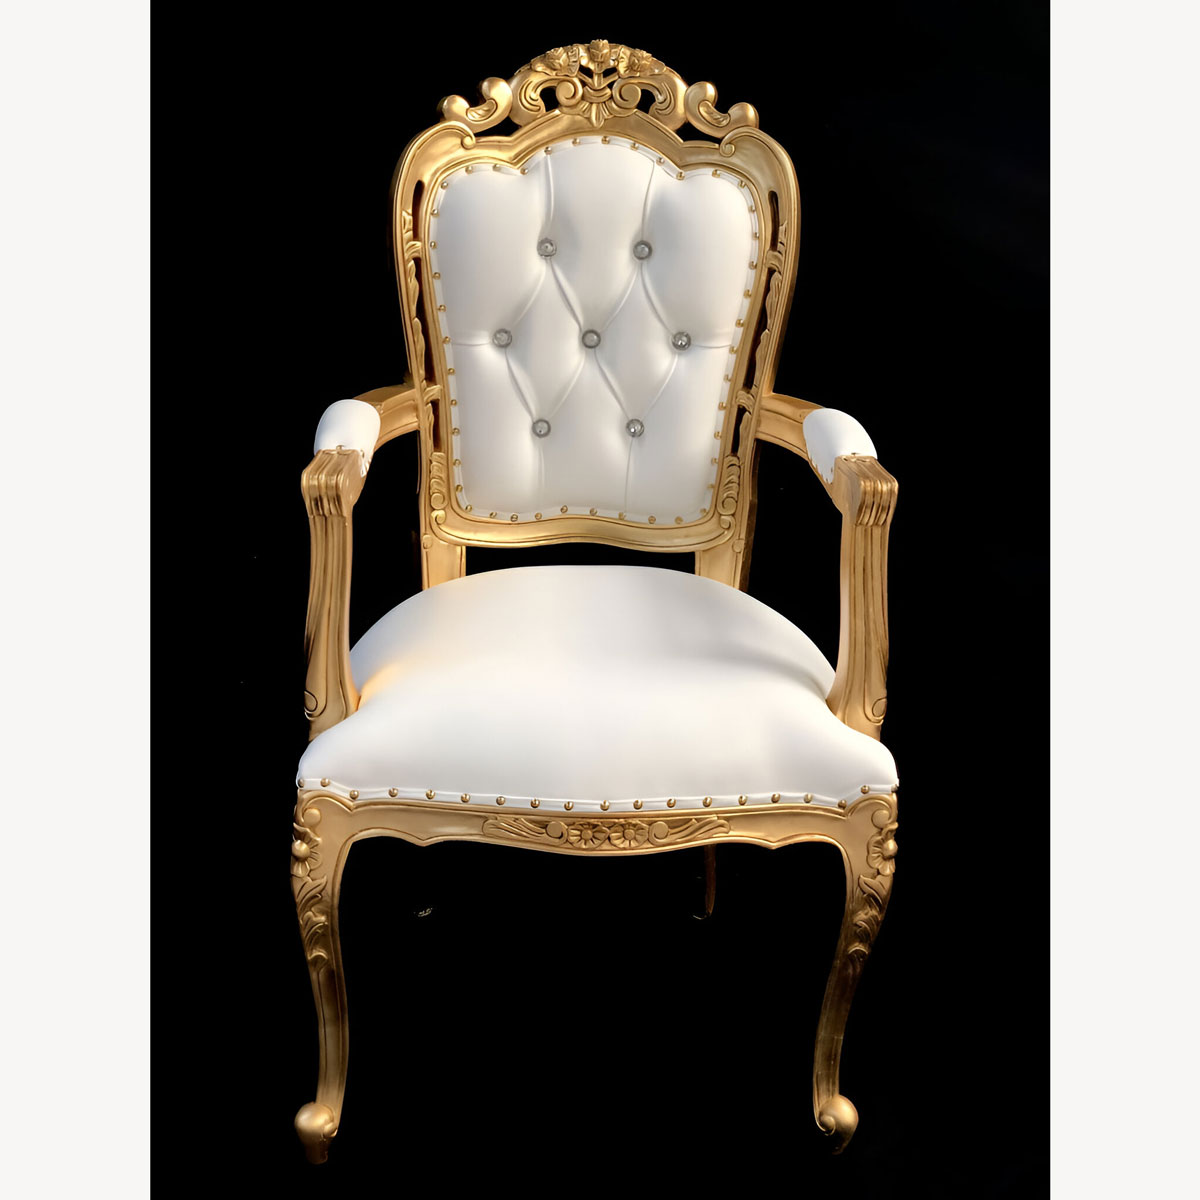 Franciscan Wedding Or Dining Chair Gold Leaf With White Faux Leather With Crystal Buttons 1 - Hampshire Barn Interiors - About Us -